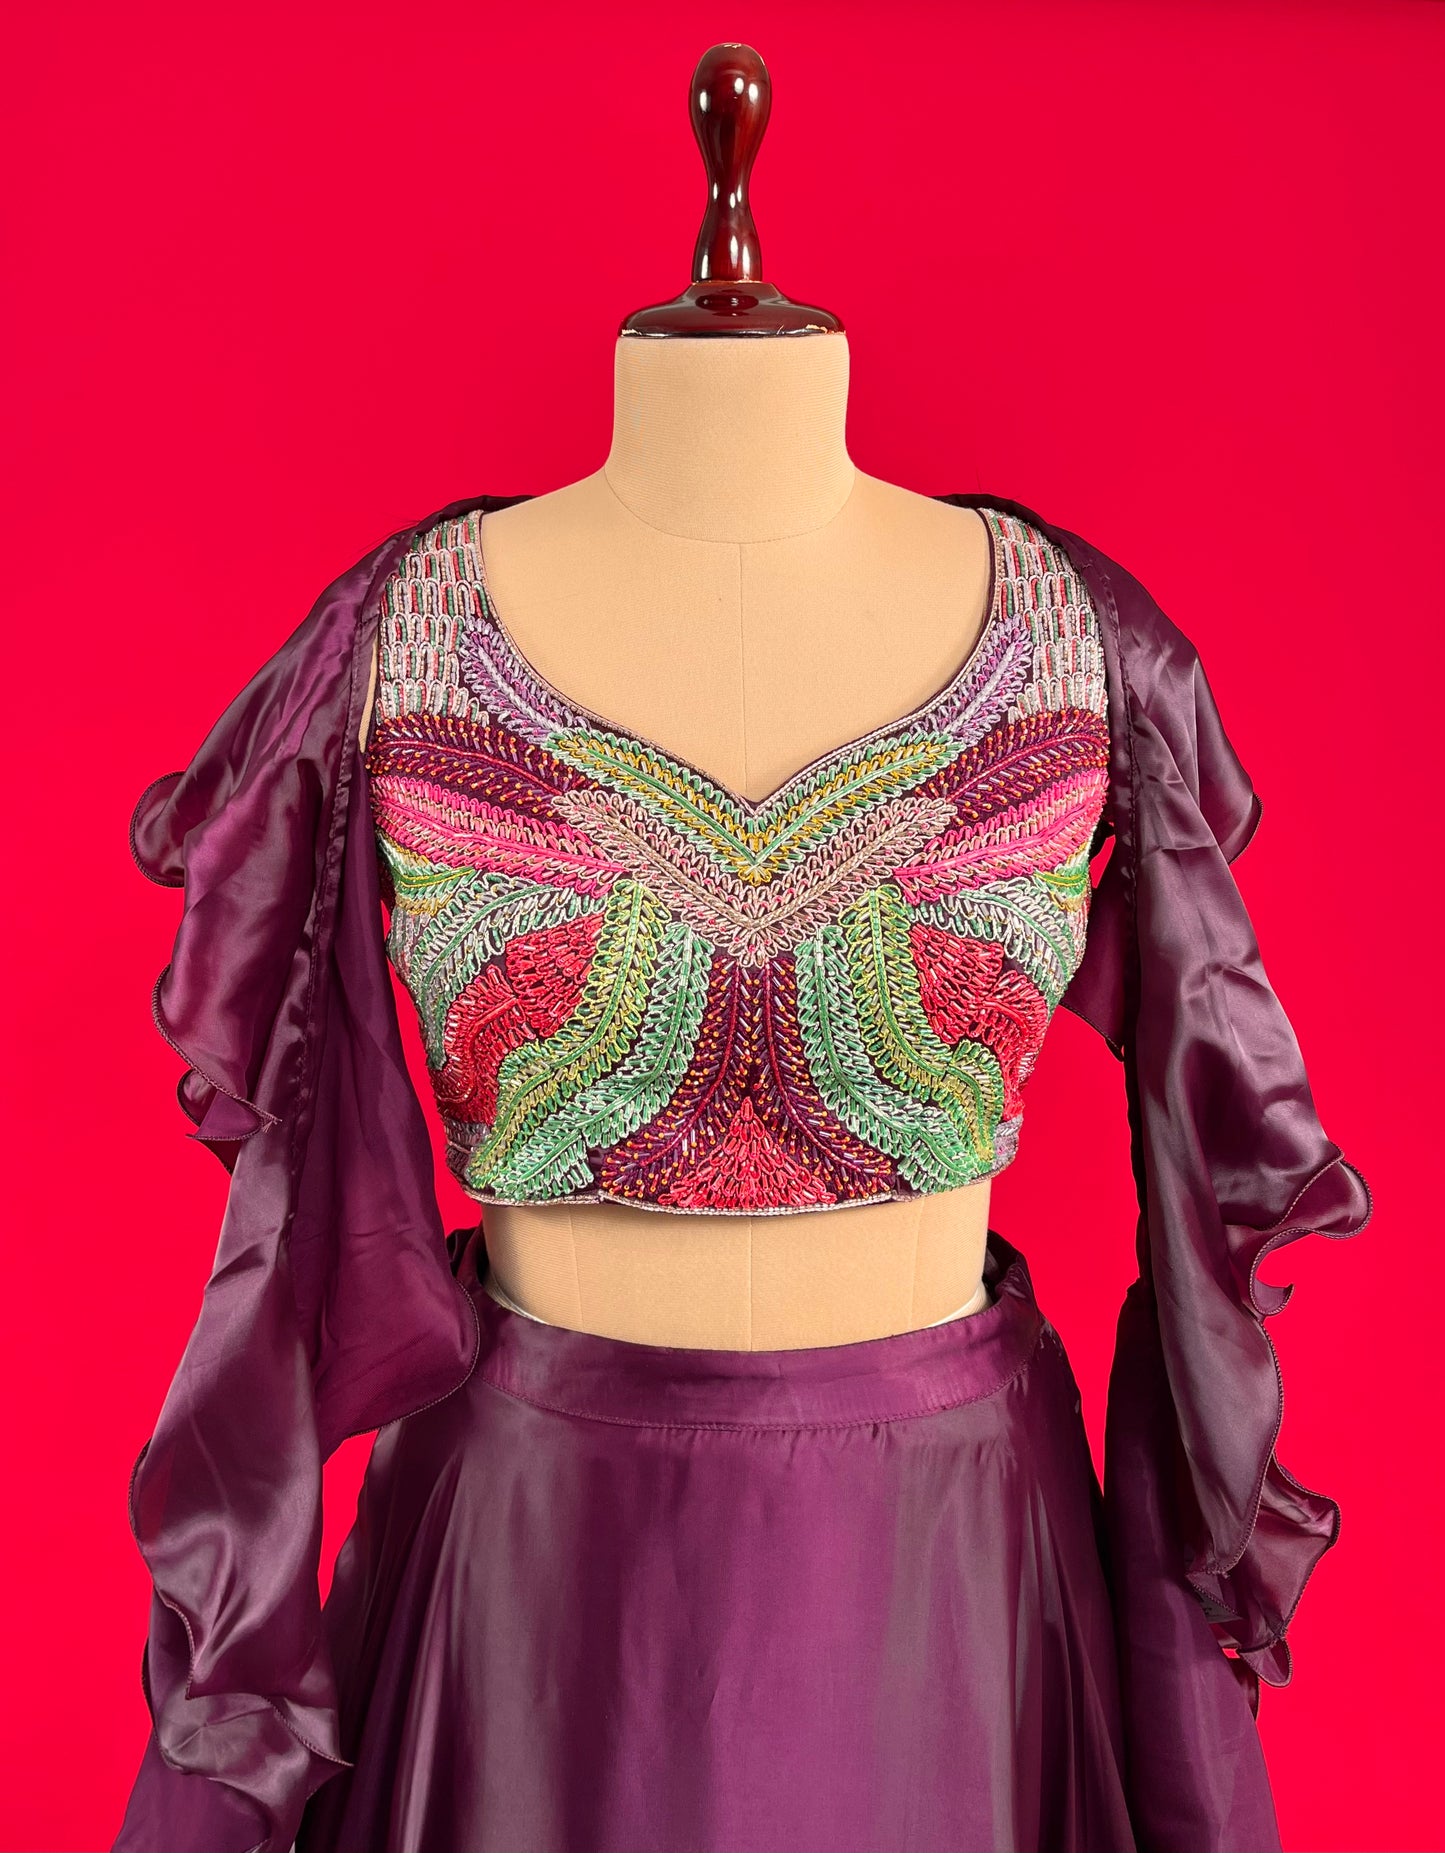 WINE COLOUR SATIN SKIRT WITH EMBROIDERED CROP TOP & RUFFLE DUPATTA EMBELLISHED WITH CUTDANA WORK